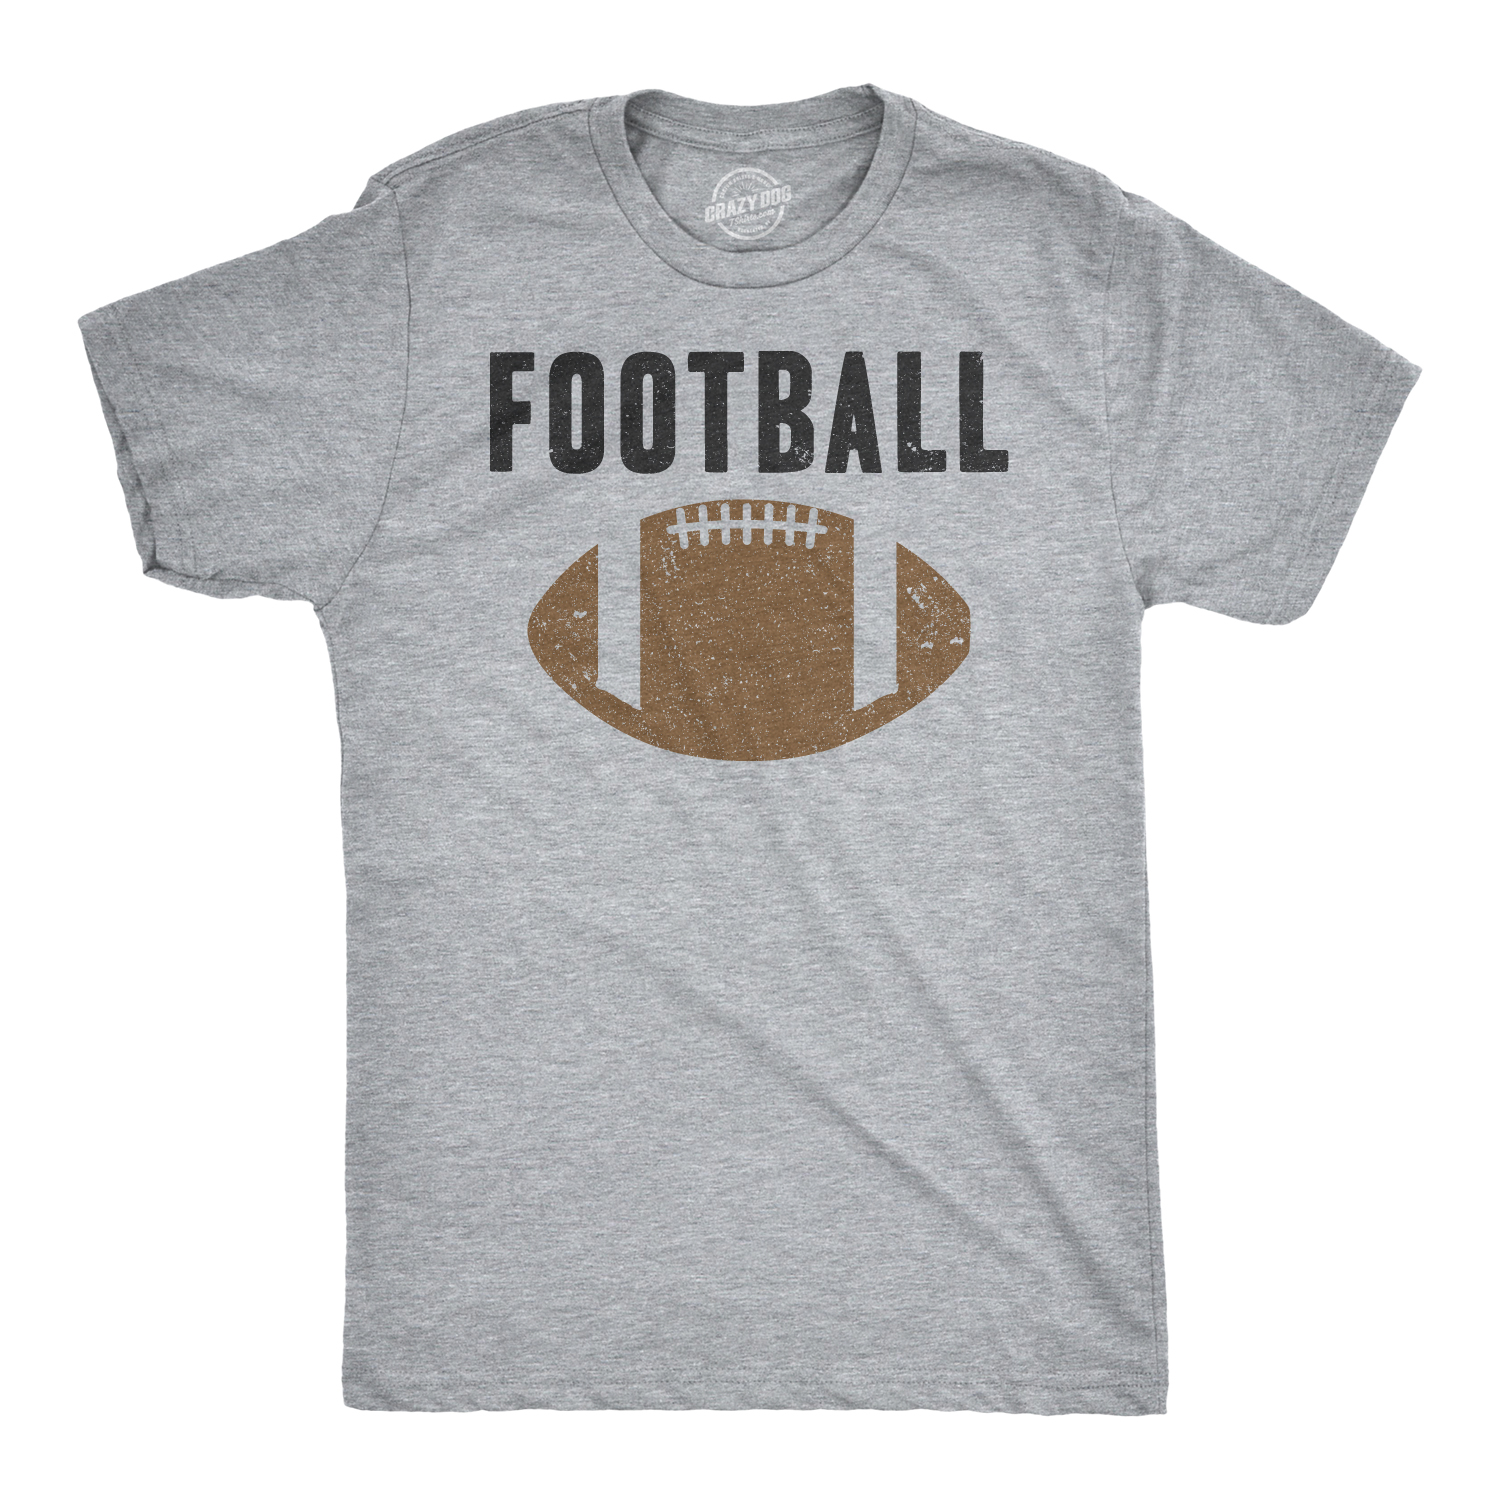 Mens Vintage Football Fantasy Game Day Gift Funny Vintage Graphic Tee for Dad Graphic Tees - image 1 of 9